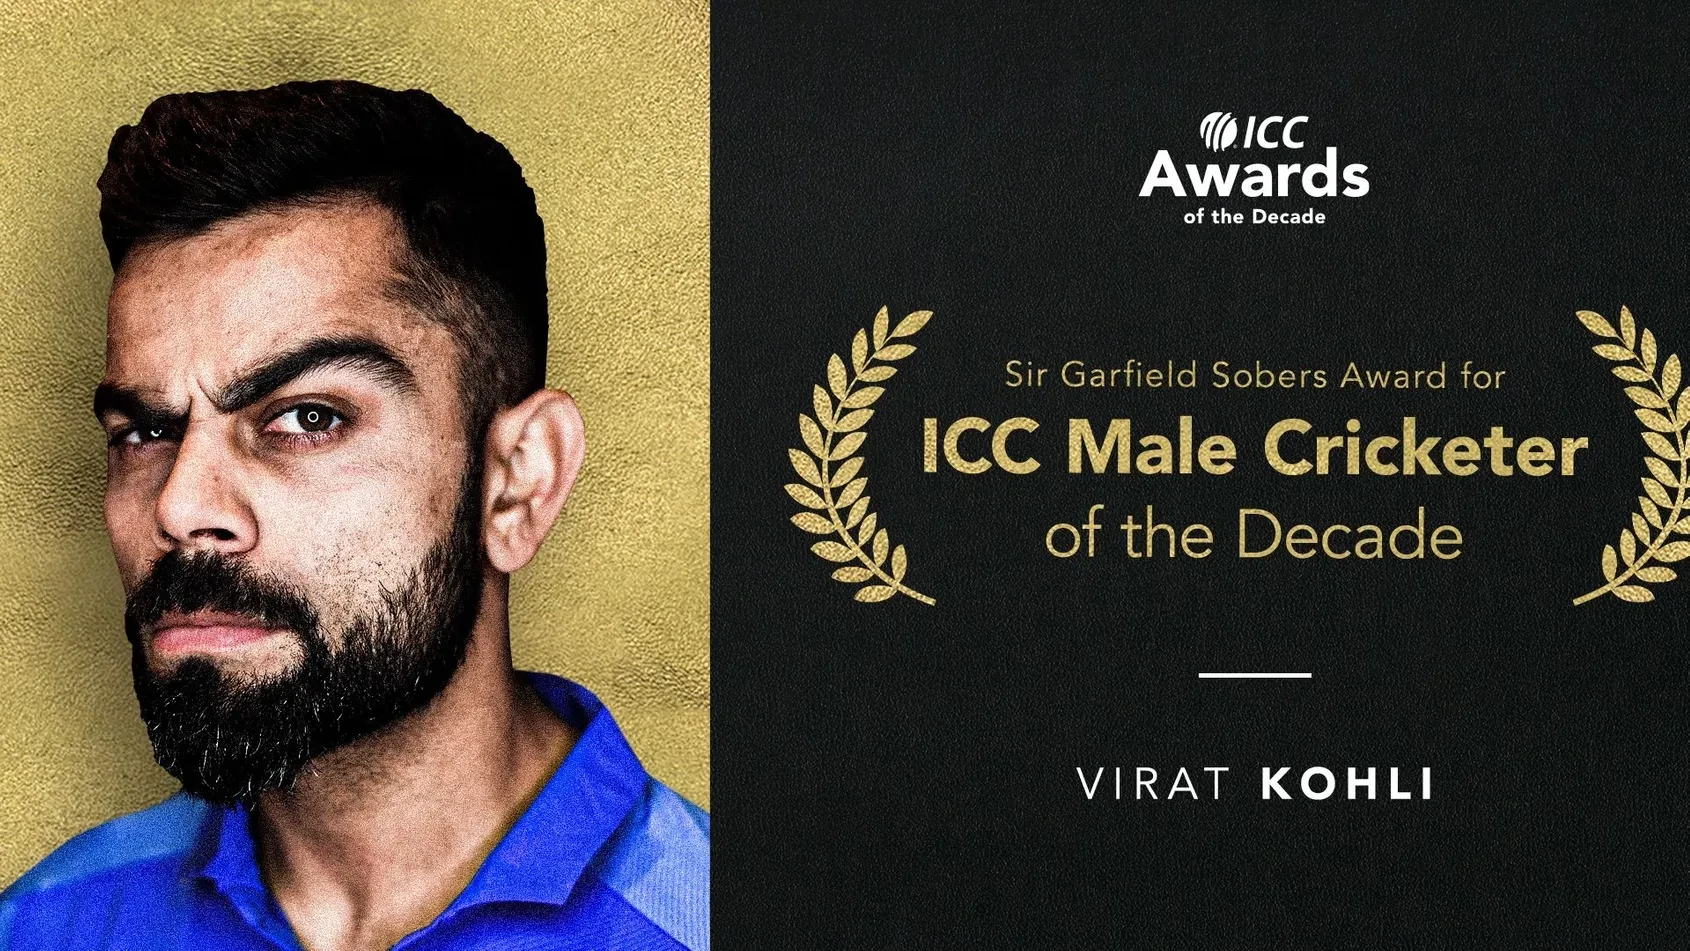 Kohli and Perry crowned cricketers of the decade by ICC